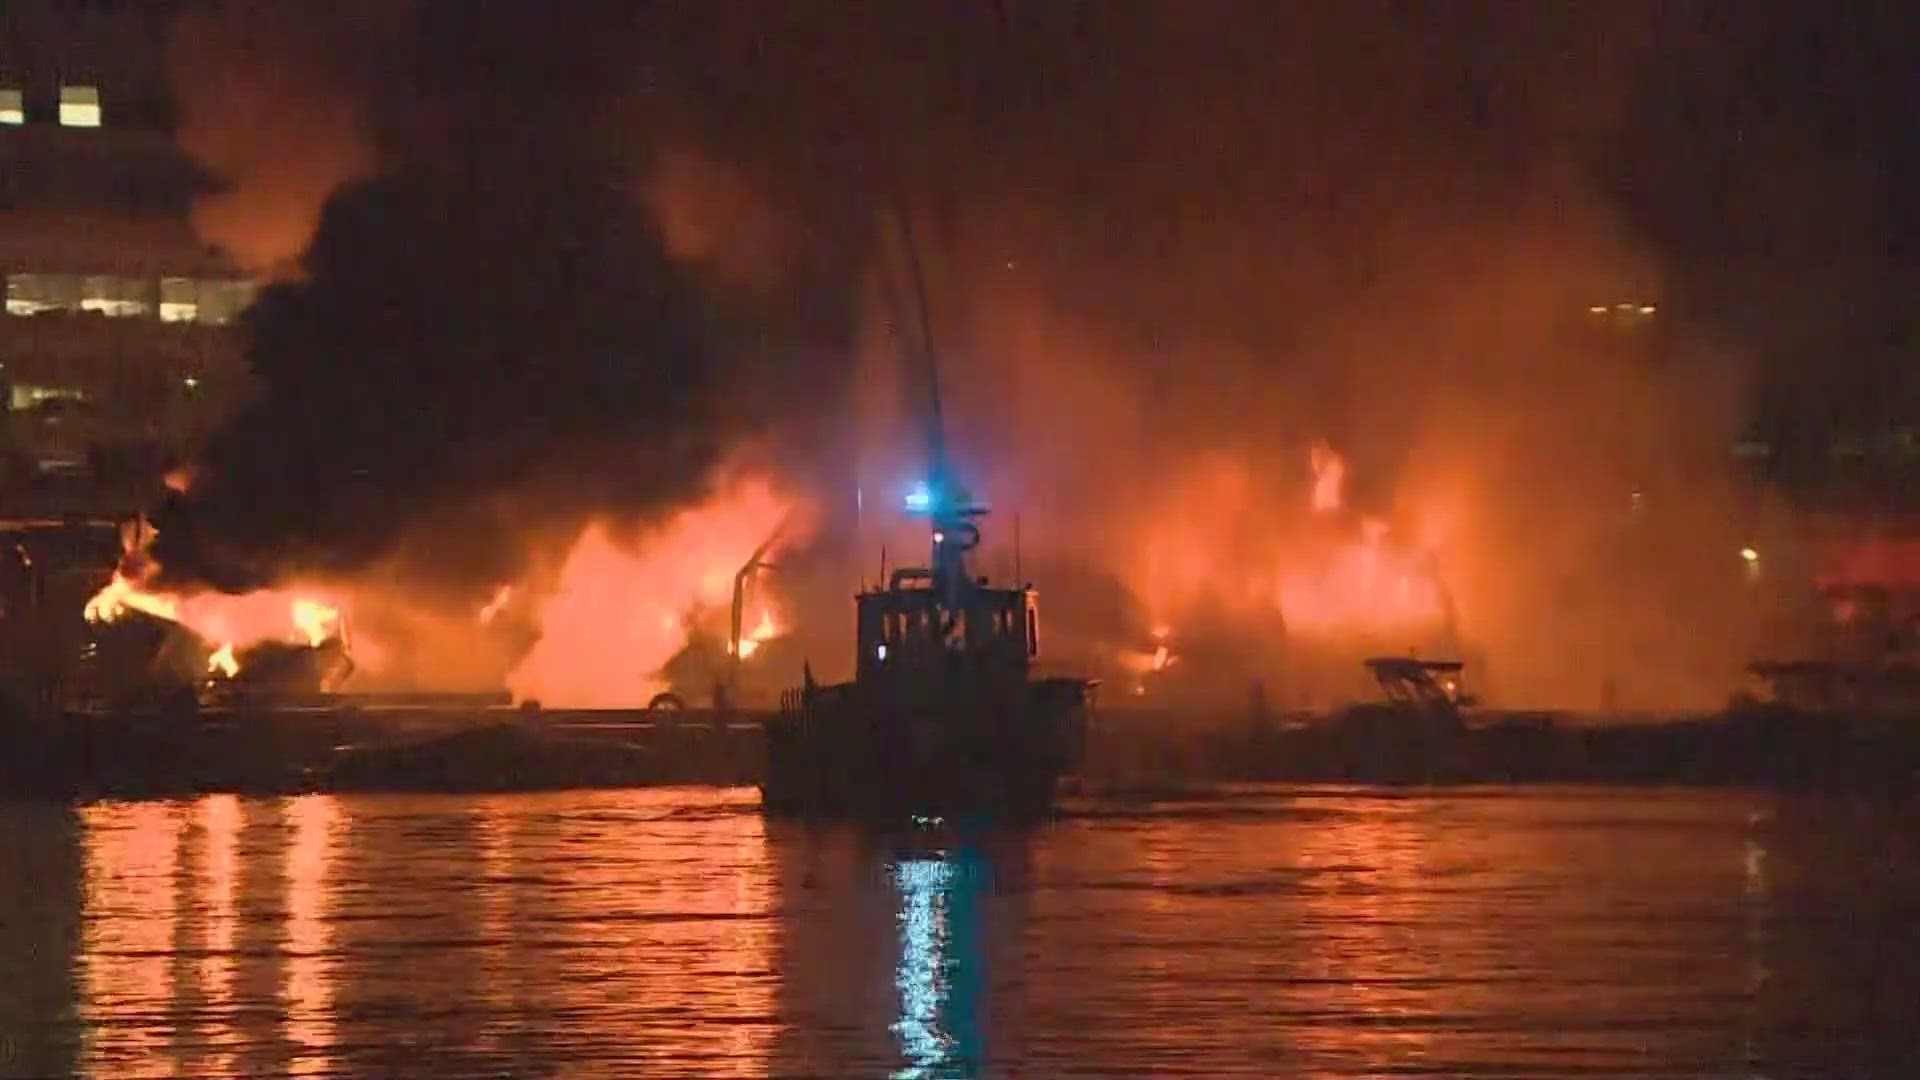 About 30 boats were destroyed in a fire on Lake Union near the Ship Canal Bridge early Wednesday morning.